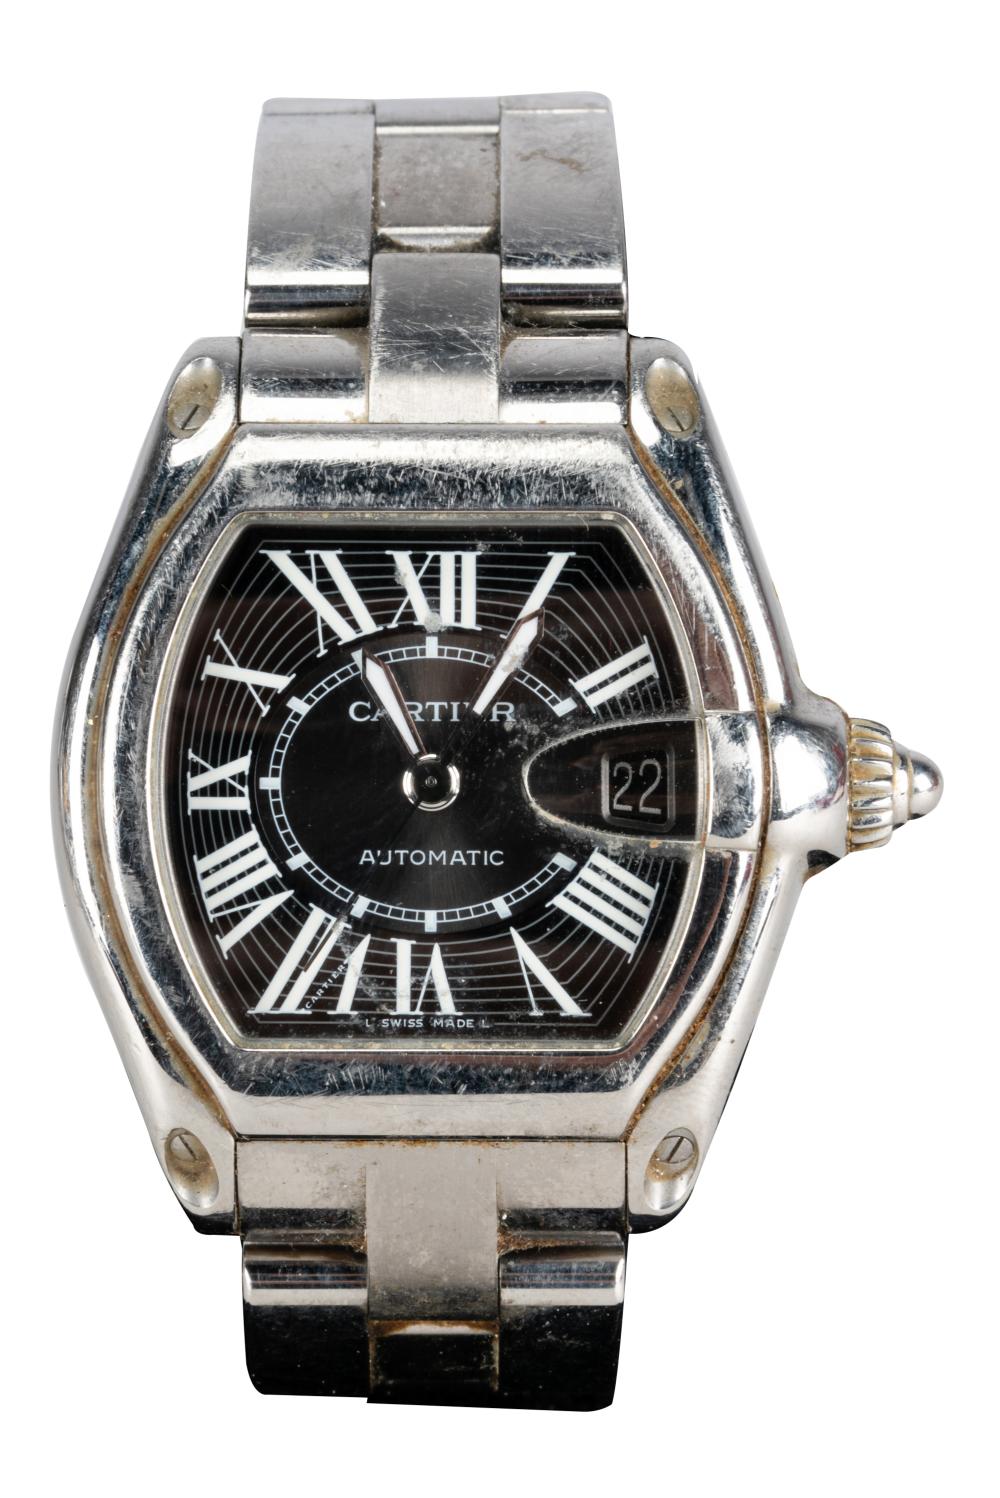 CARTIER ROADSTER STAINLESS STEEL 331cac